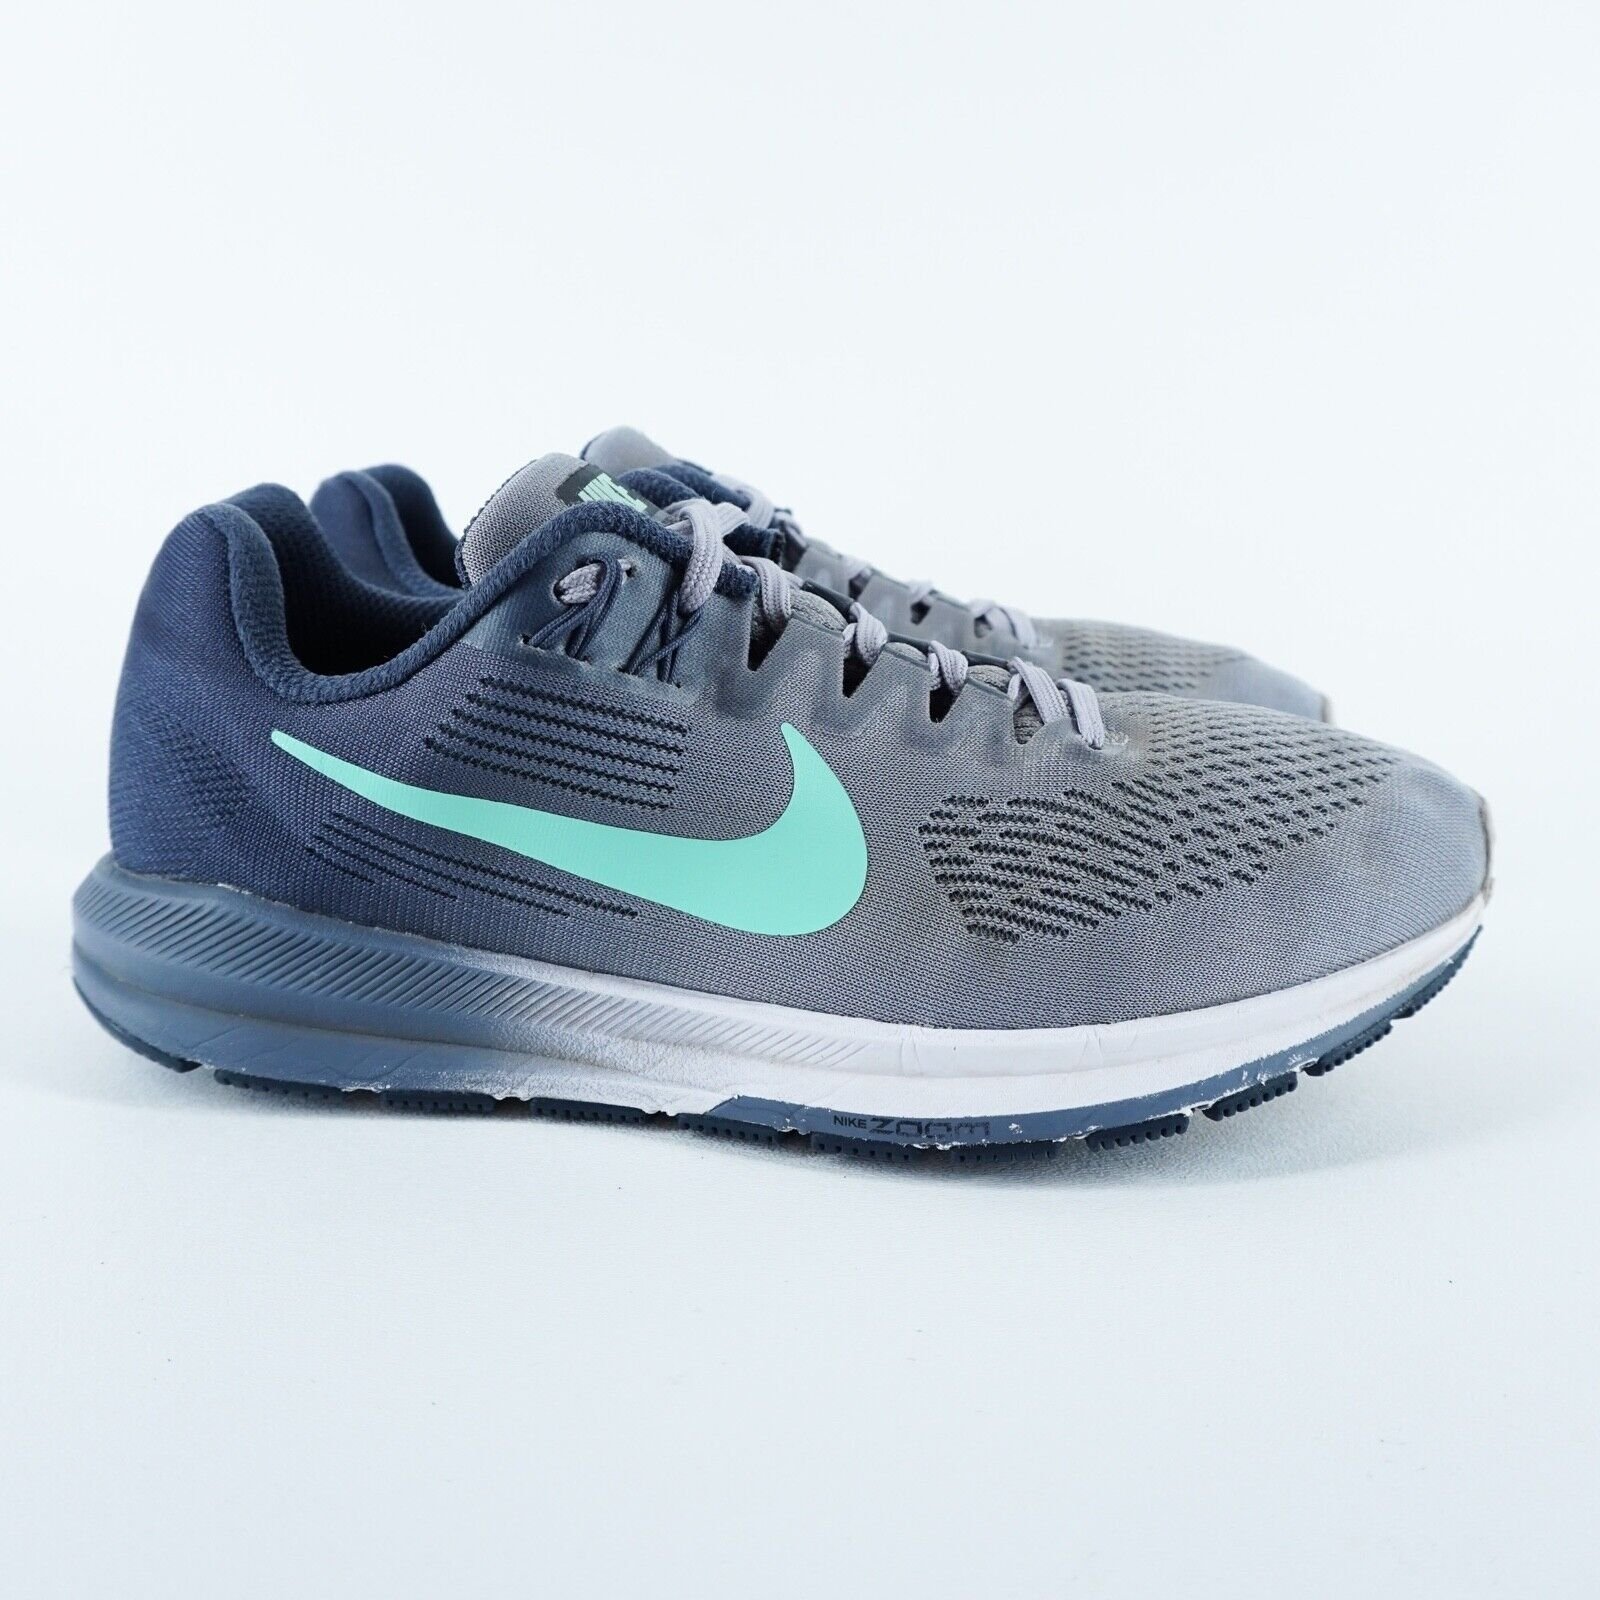 Nike Zoom Structure 21 Running Shoes in GreyBlue.jpg